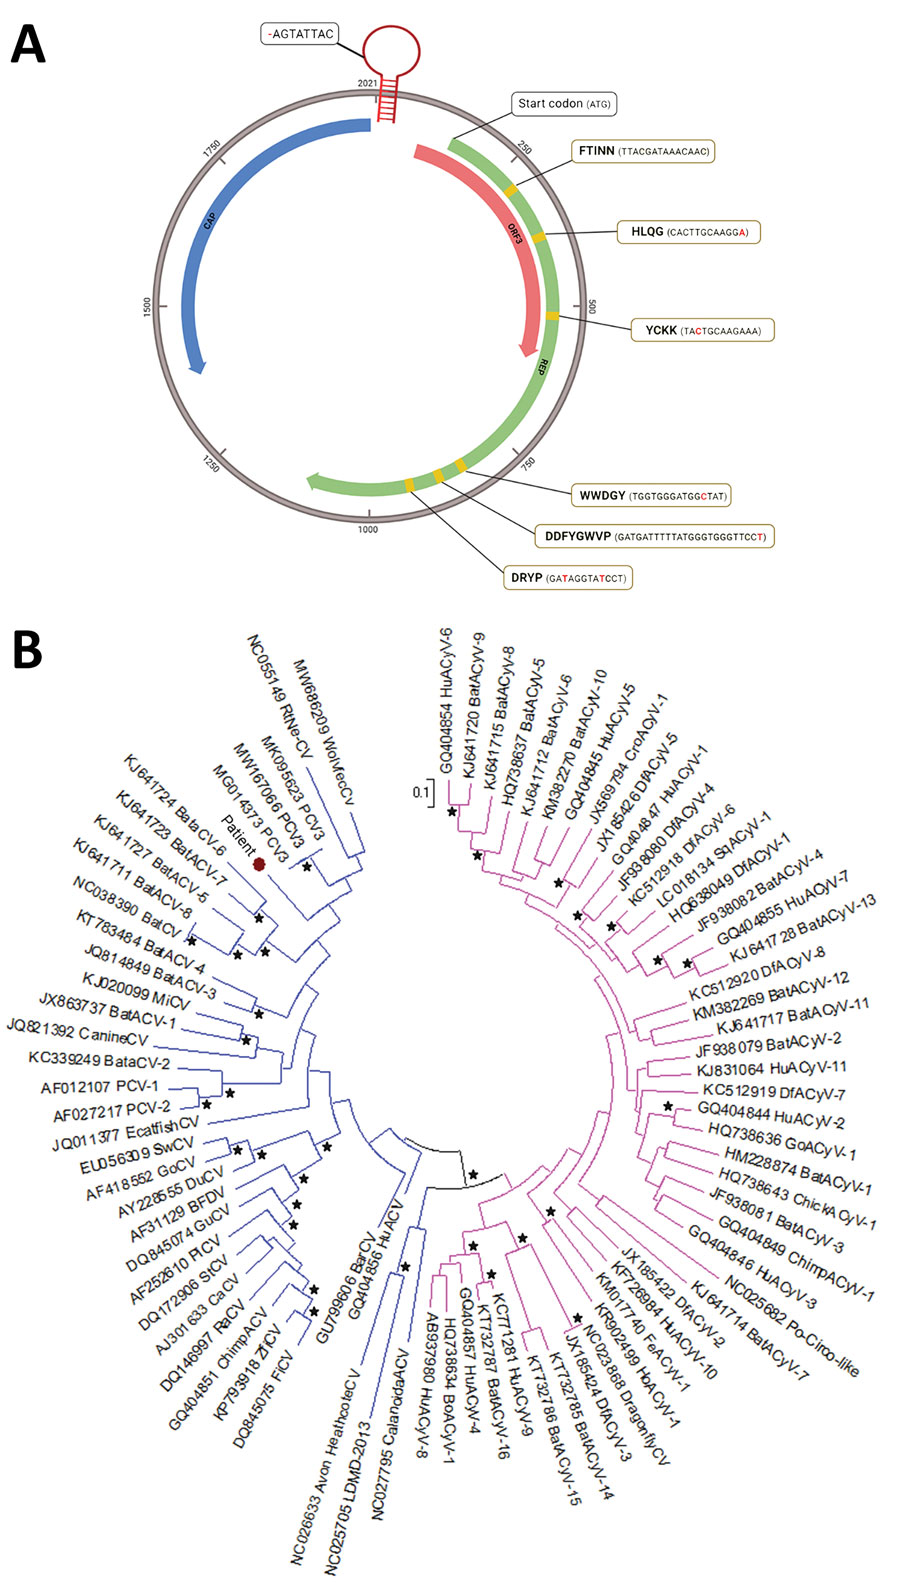 Genomic and phylogenetic analysis of putative novel virus, Circovirus parisii, from an immunocompromised patient with hepatitis, France, 2022. A) Full-length genome of C. parisii reconstructed from shotgun metagenomics (SMg) sequence analysis. The genome is a 2021-nt single-stranded circular DNA containing 3 predicted open reading frames (ORFs), including ORF1 (replicase, green), ORF2 (capsid protein, blue) and ORF3 (red). The stem-loop contains an AGTATTAC sequence (origin of replication) that misses 1 nt (red dash) compared with other circoviruses. An ATG start codon is located at the 5′ end of the replicase gene. The replicase gene contains 6 conserved motifs, represented with a yellow background (amino acid and nucleotide sequences), with silent substitutions in red. B) Phylogenetic analysis of the replicase gene of the Circoviridae family, including the newly discovered C. parisii (red dot), known circoviruses (blue), and known cycloviruses (pink). Bootstrap values >70% are indicated with black stars. Scale bar indicates substitutions per site.